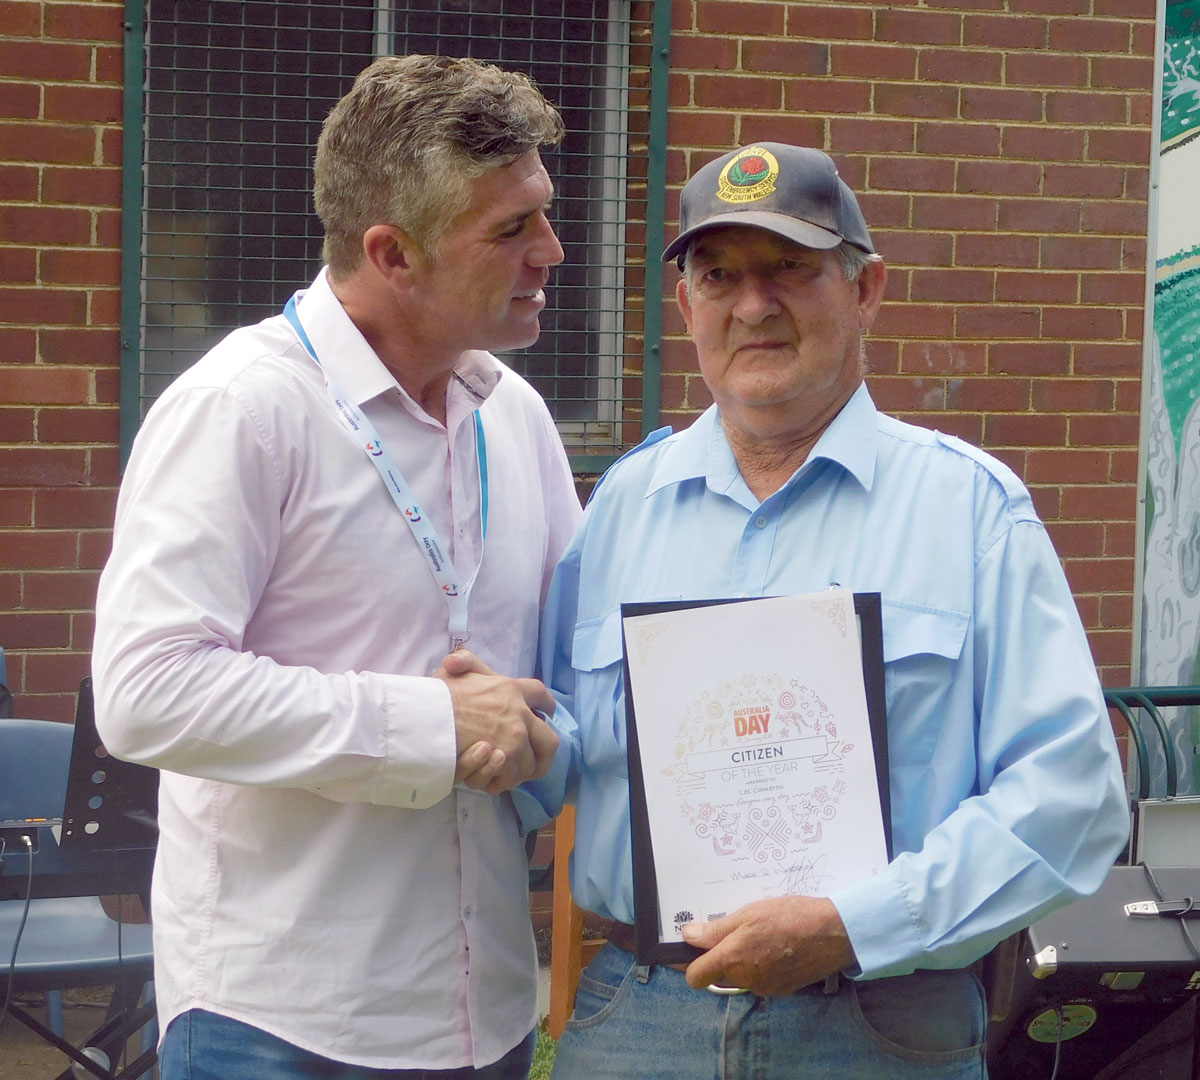 Les Cameron – Australia Day Citizen Of The Year